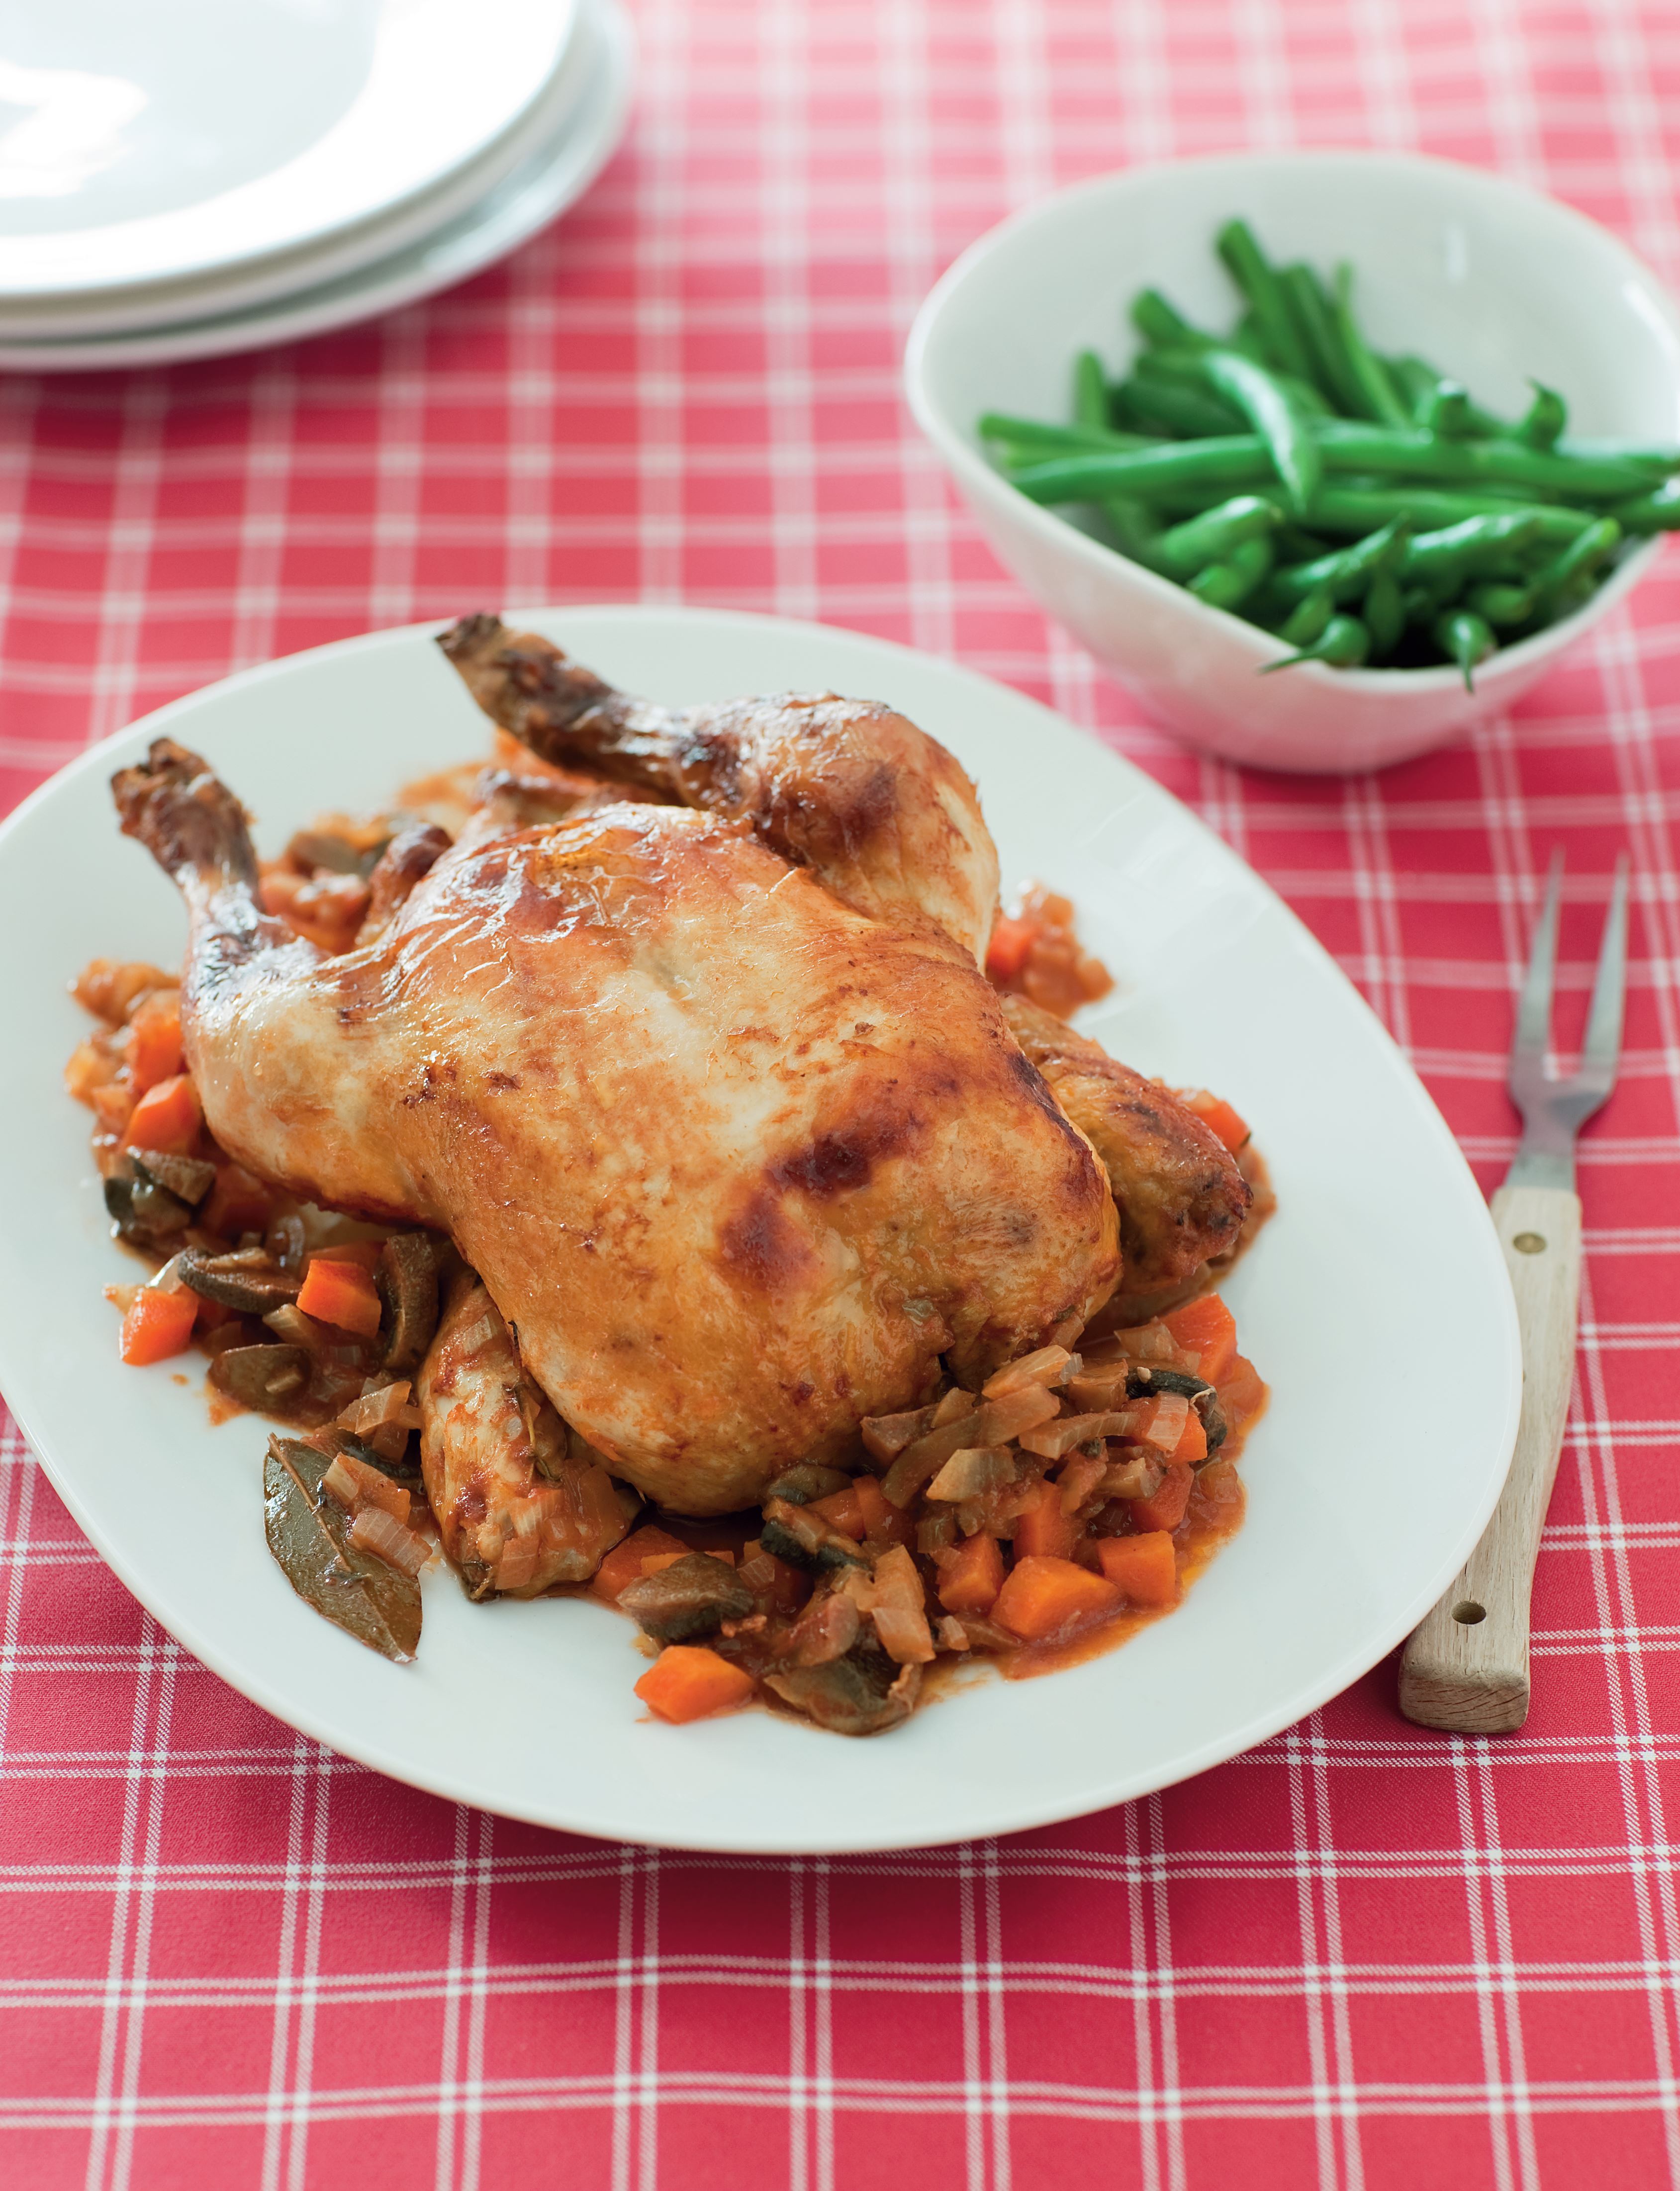 Pot-roasted chicken with Italian flavours